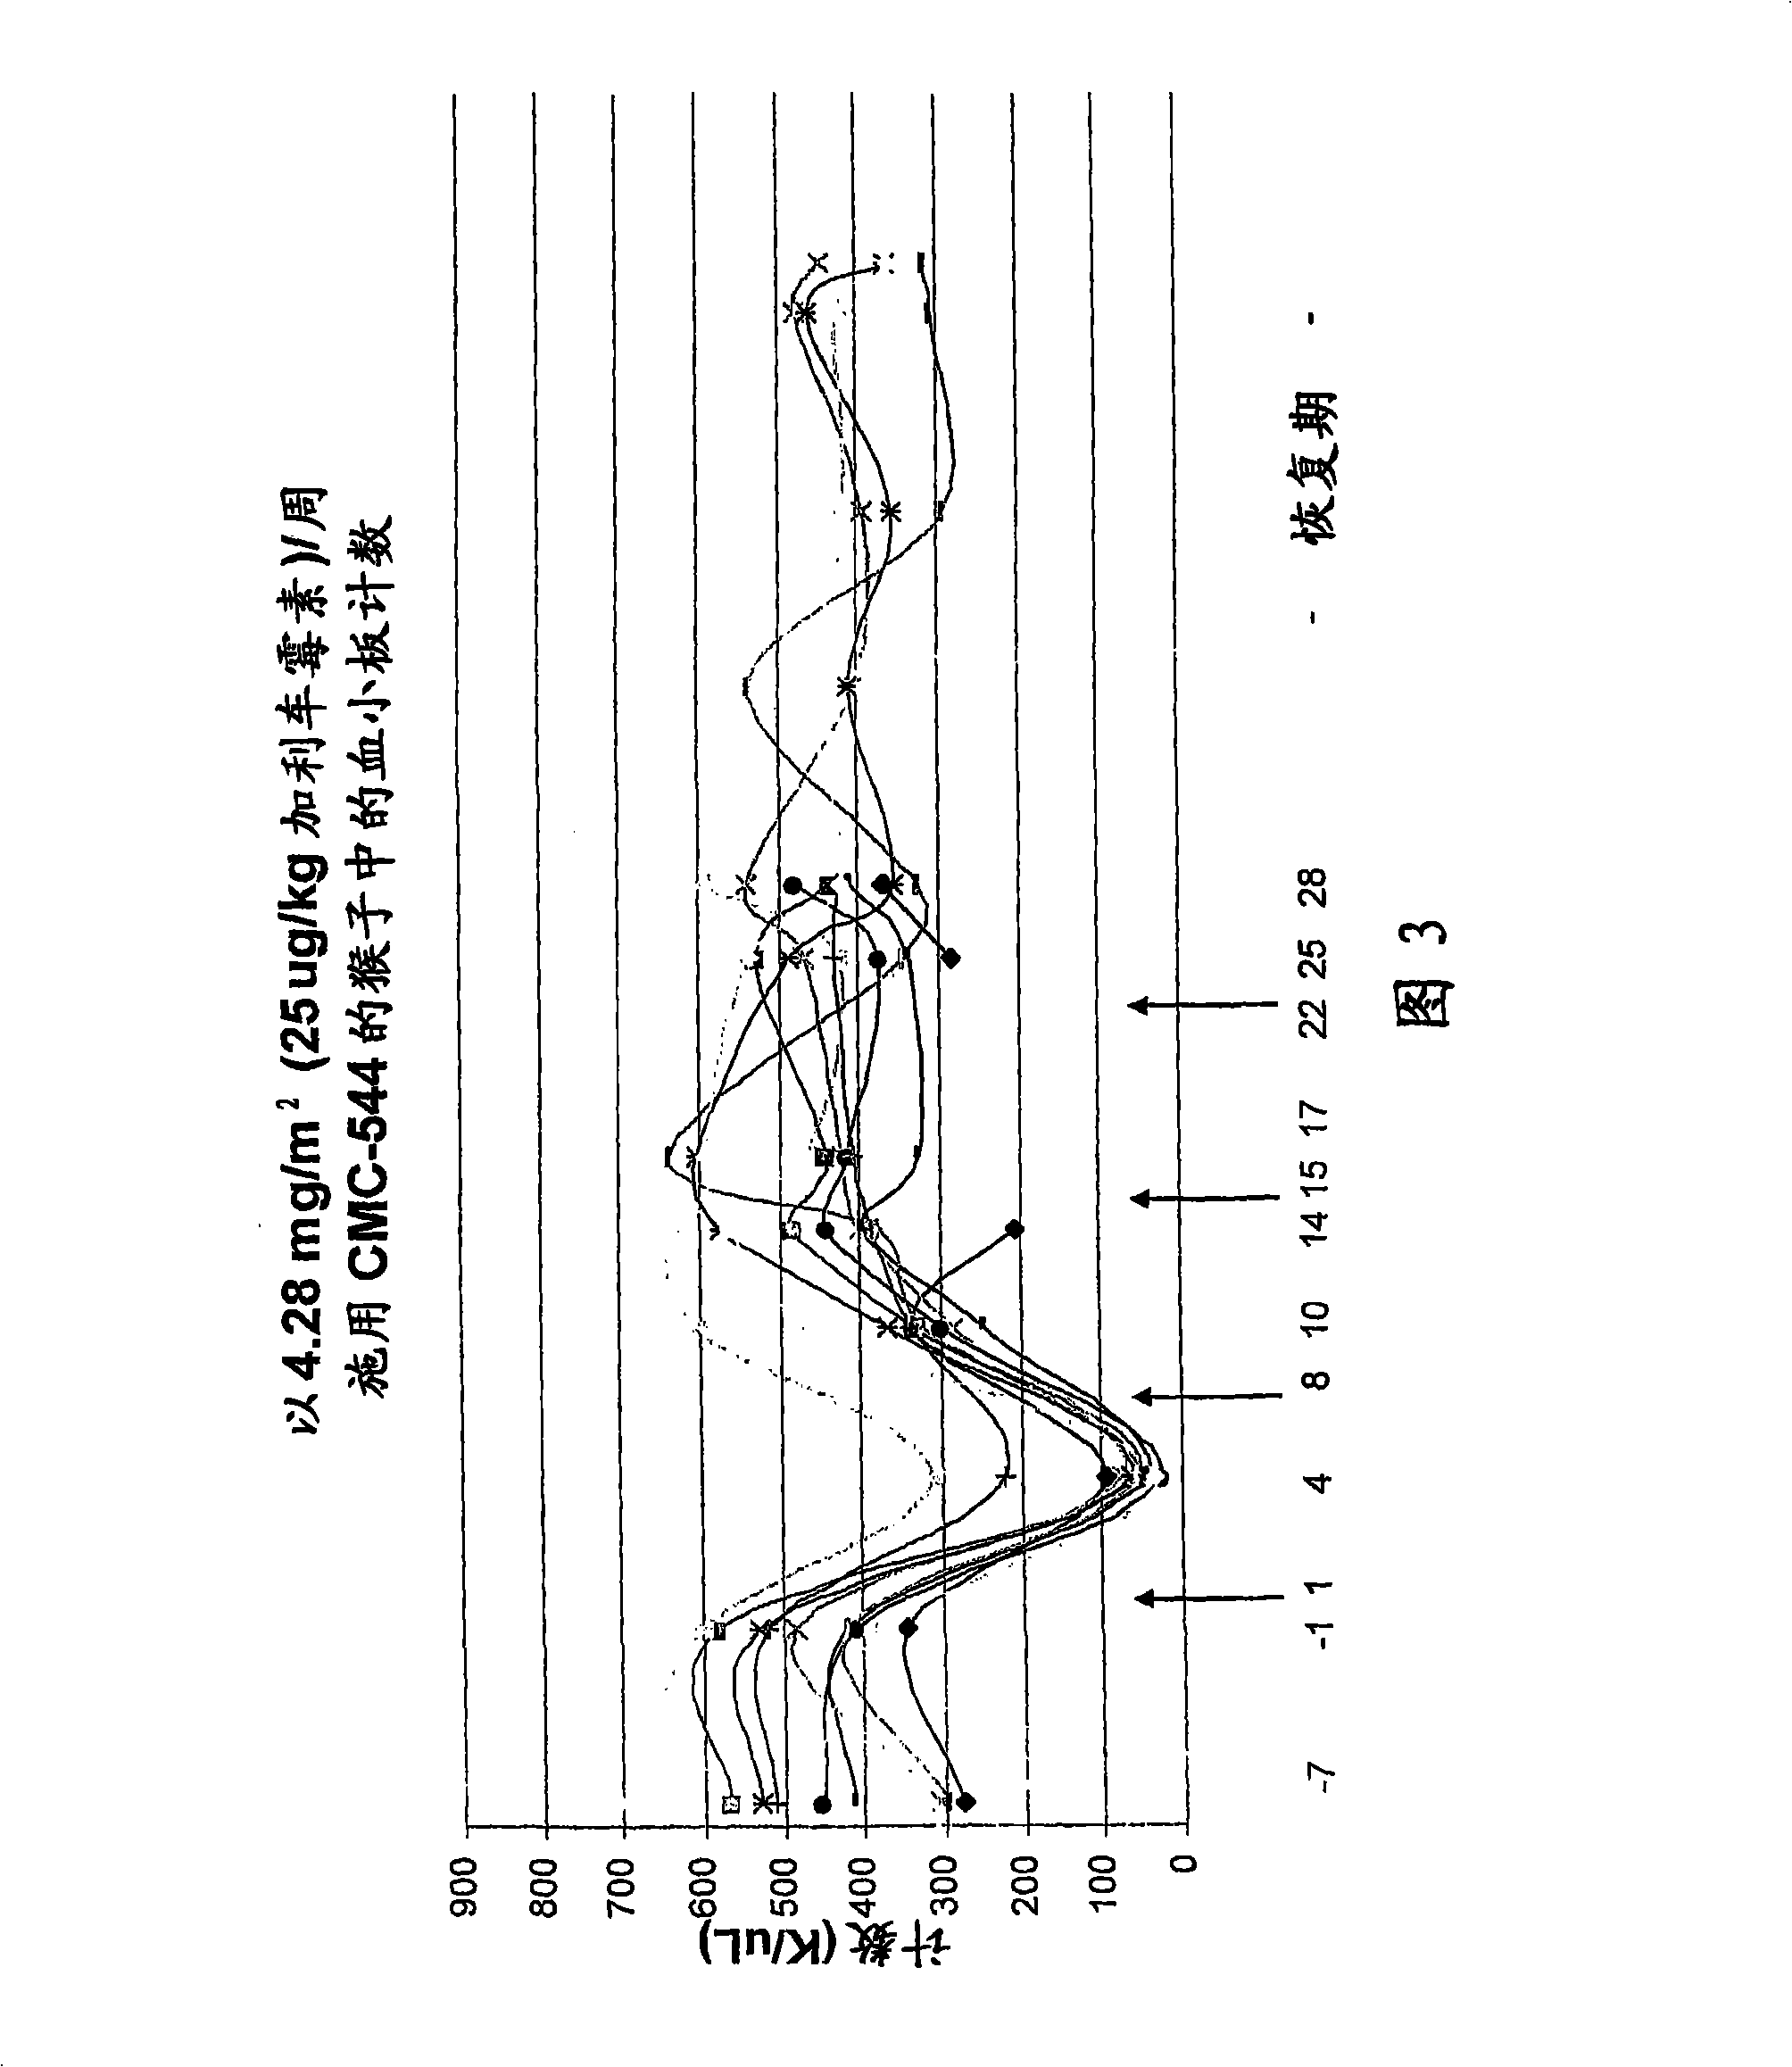 Interleukin-11 compositions and methods of use